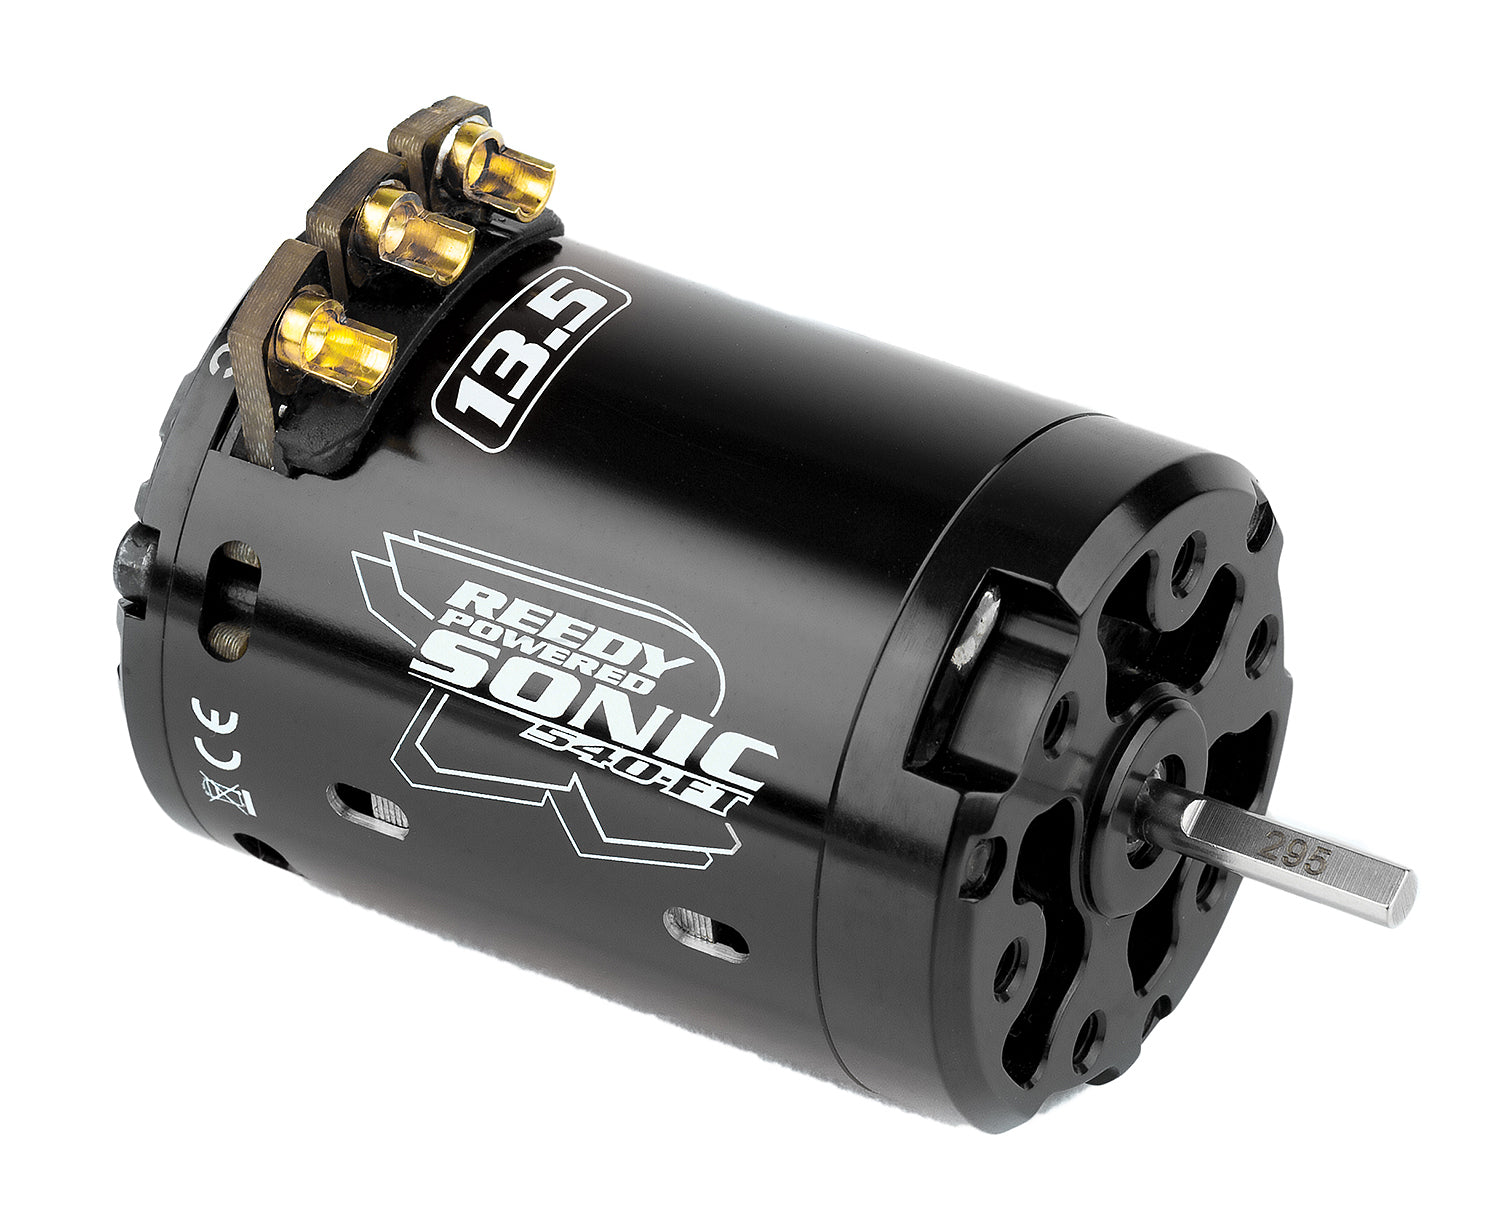 Reedy-Reedy Reedy Sonic 540-FT Fixed-Timing 13.5 Competition Brushless Motor -rc-cars-scale-models-sunshine-coast